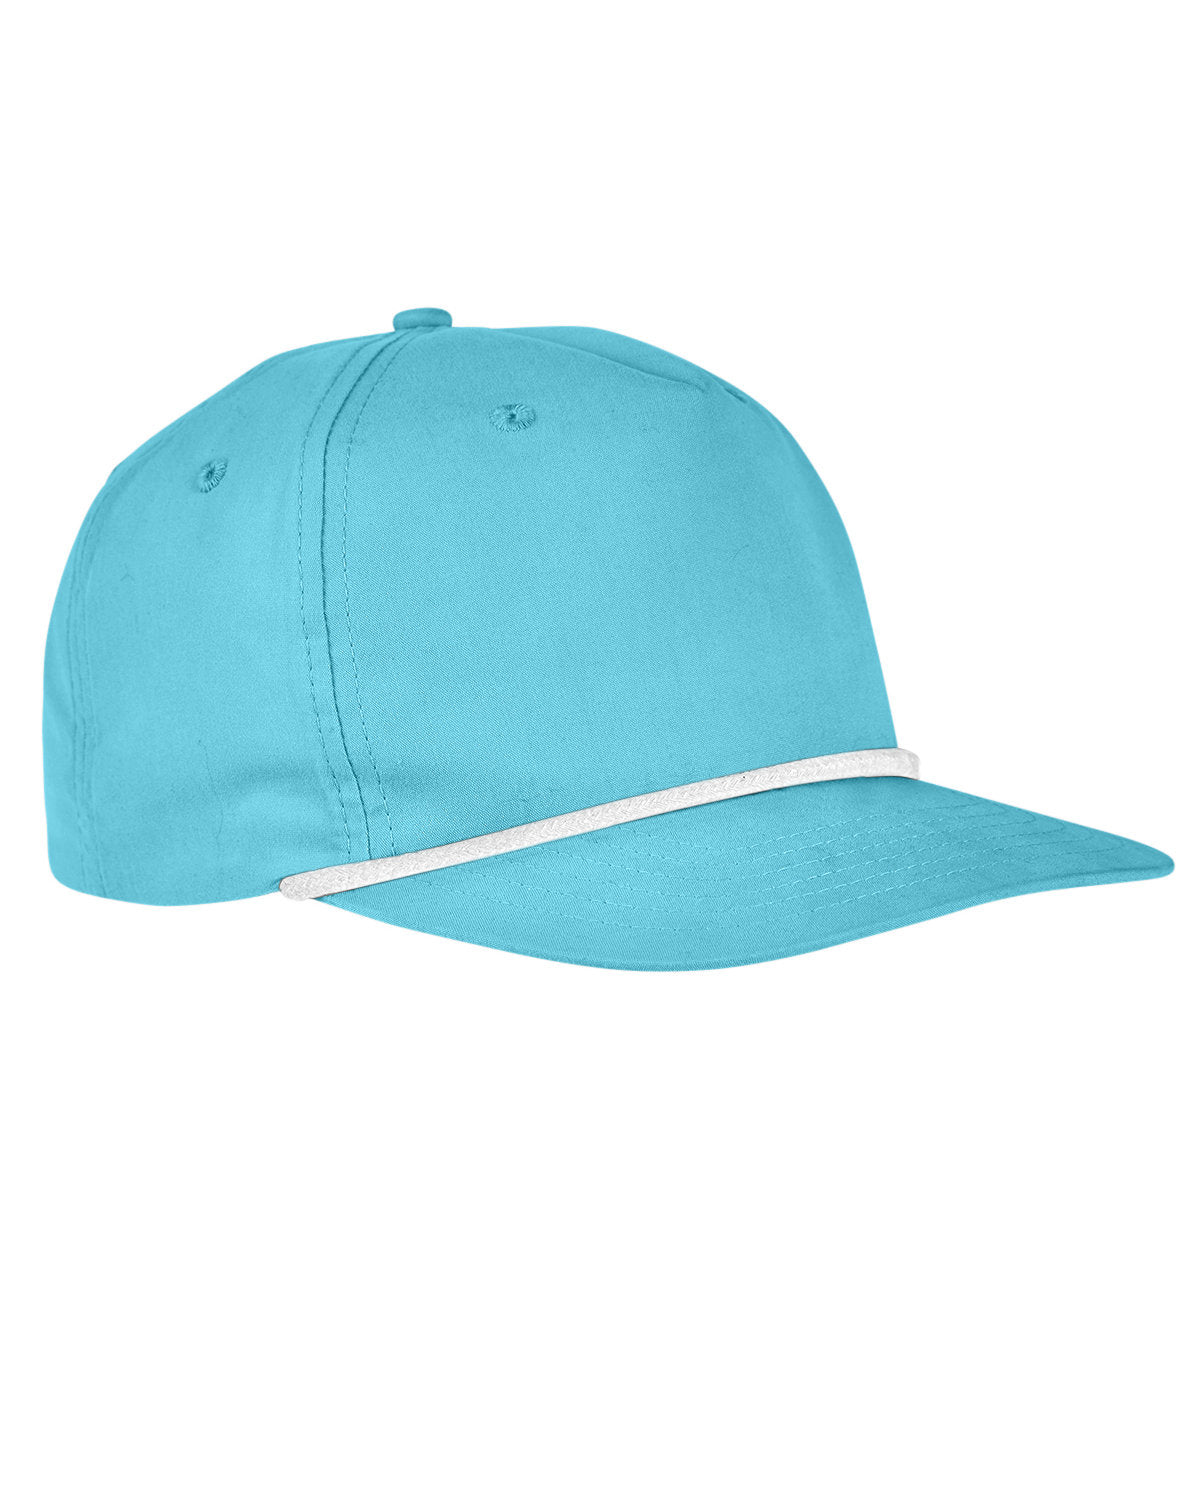 Headwear TURQUOISE/ WHITE OS Big Accessories